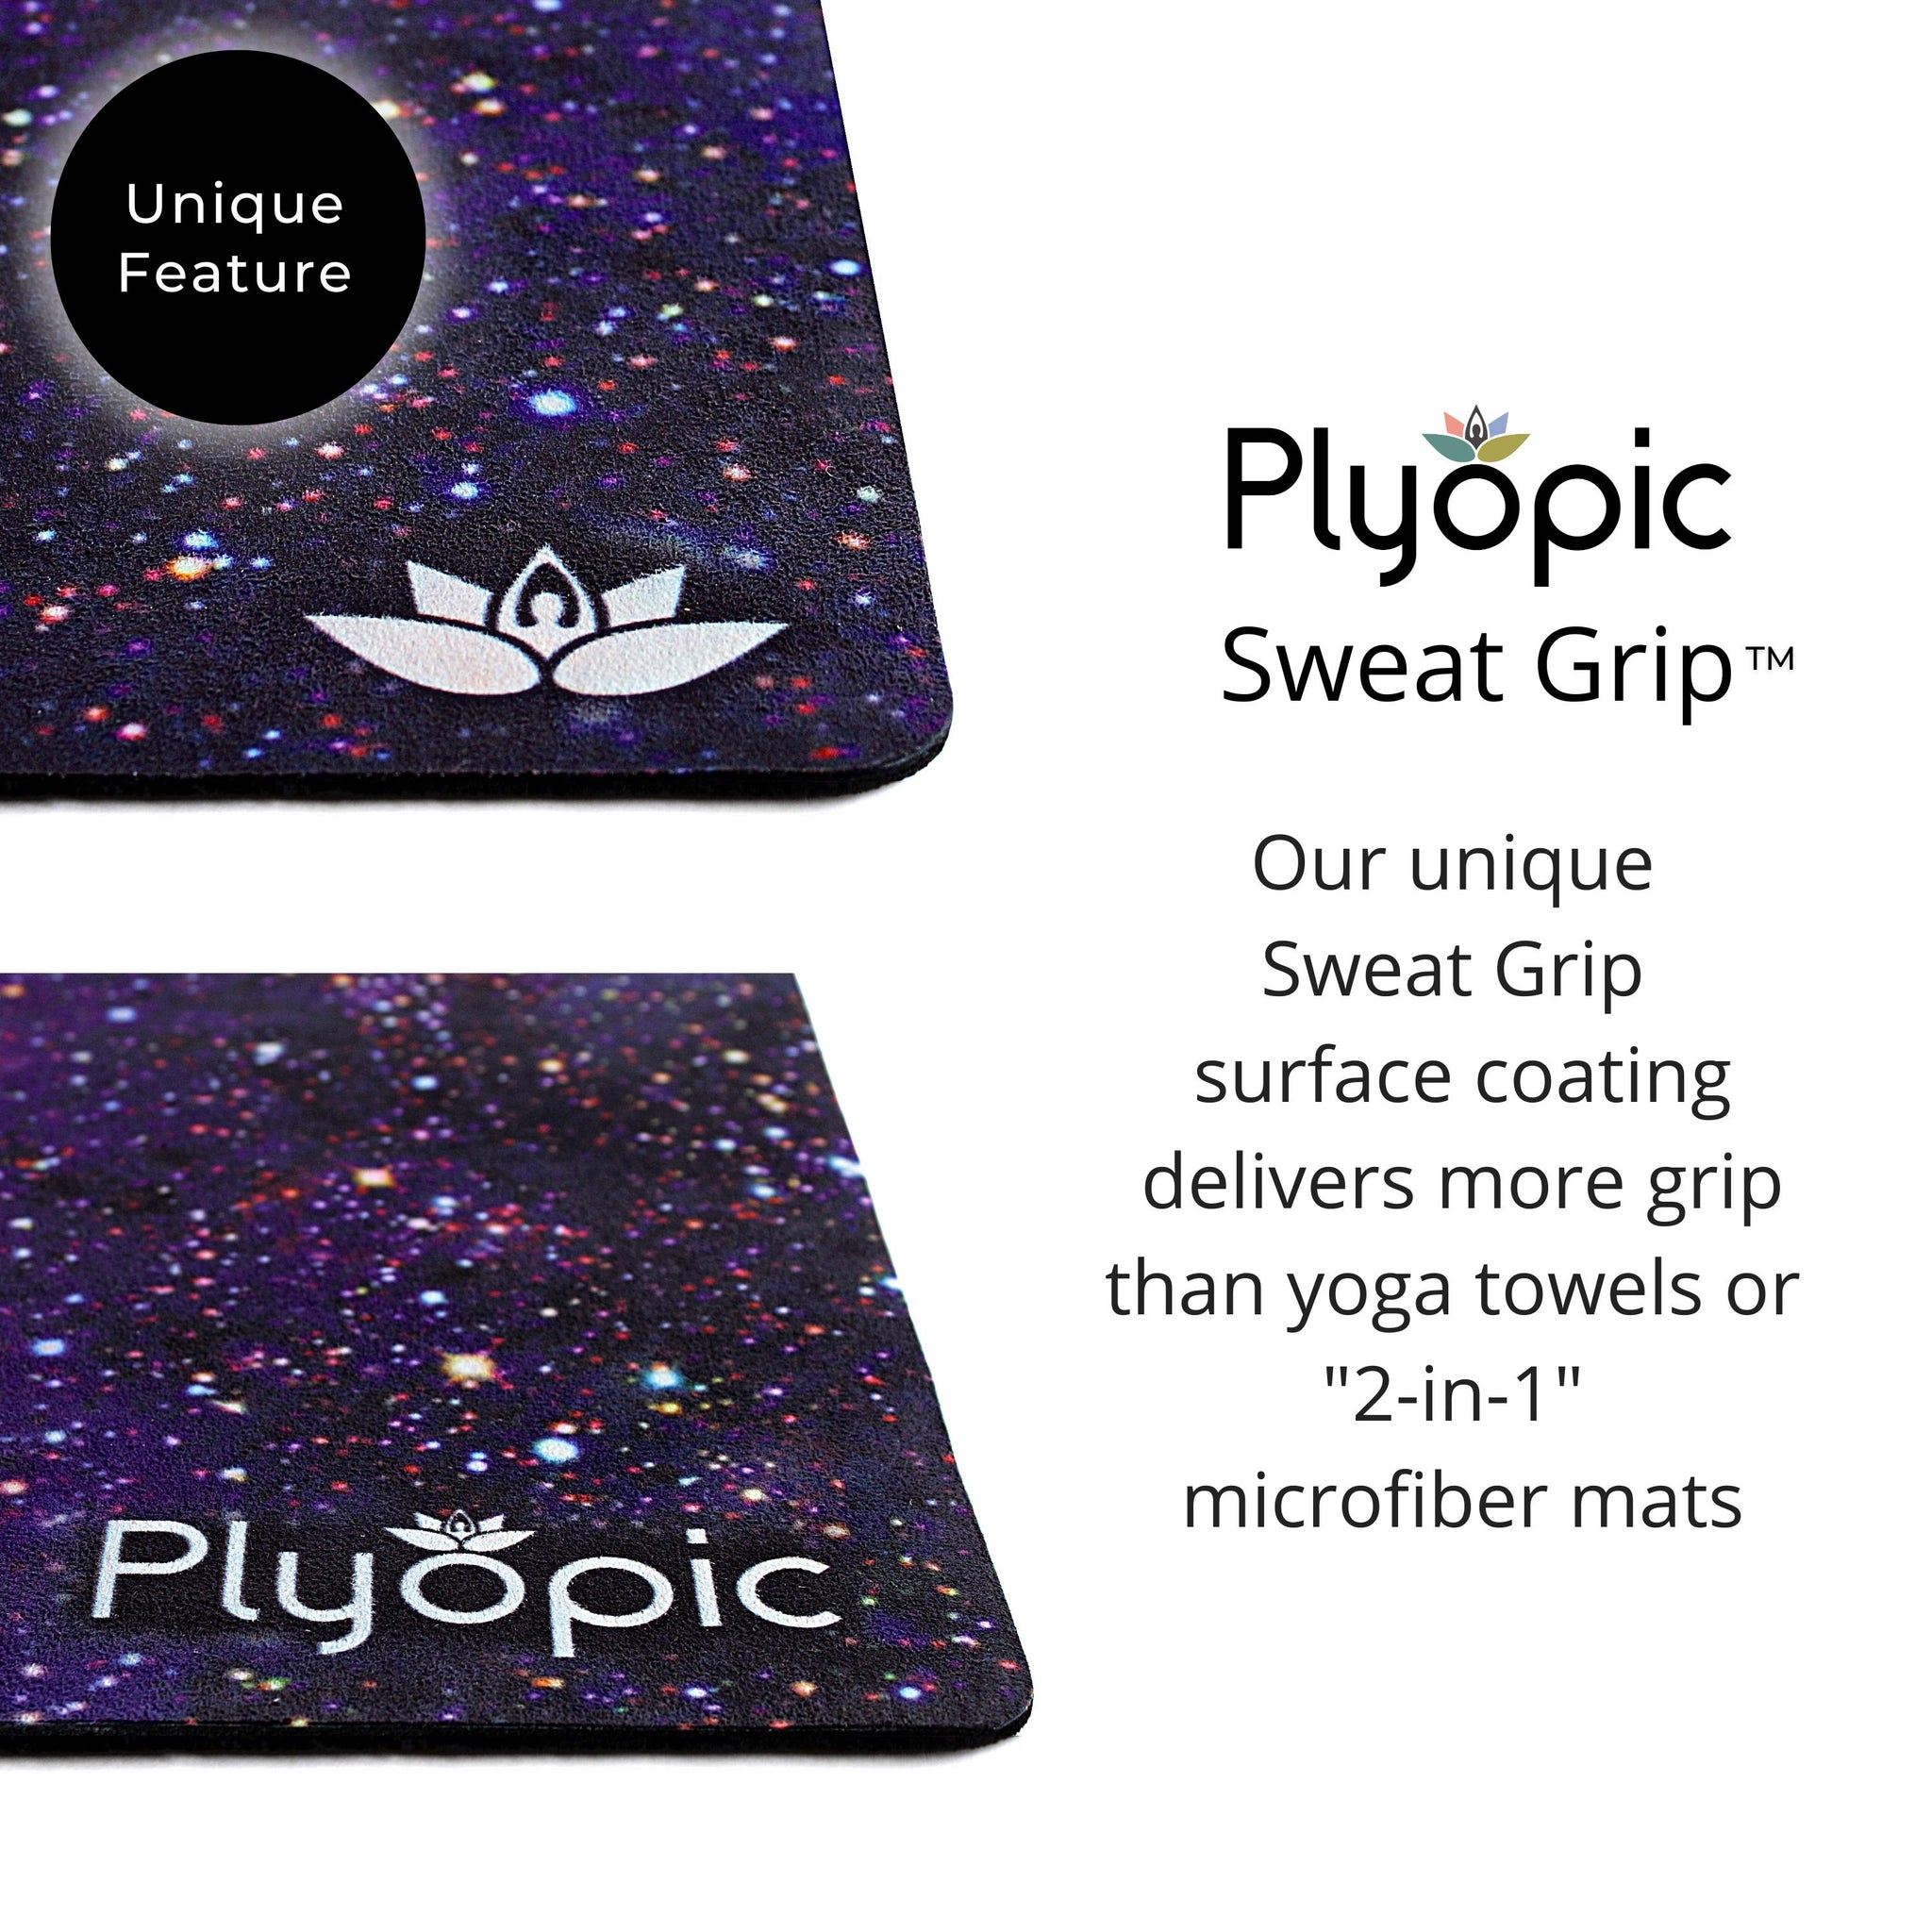 All-in-One-Yogamatte „Nebula“.